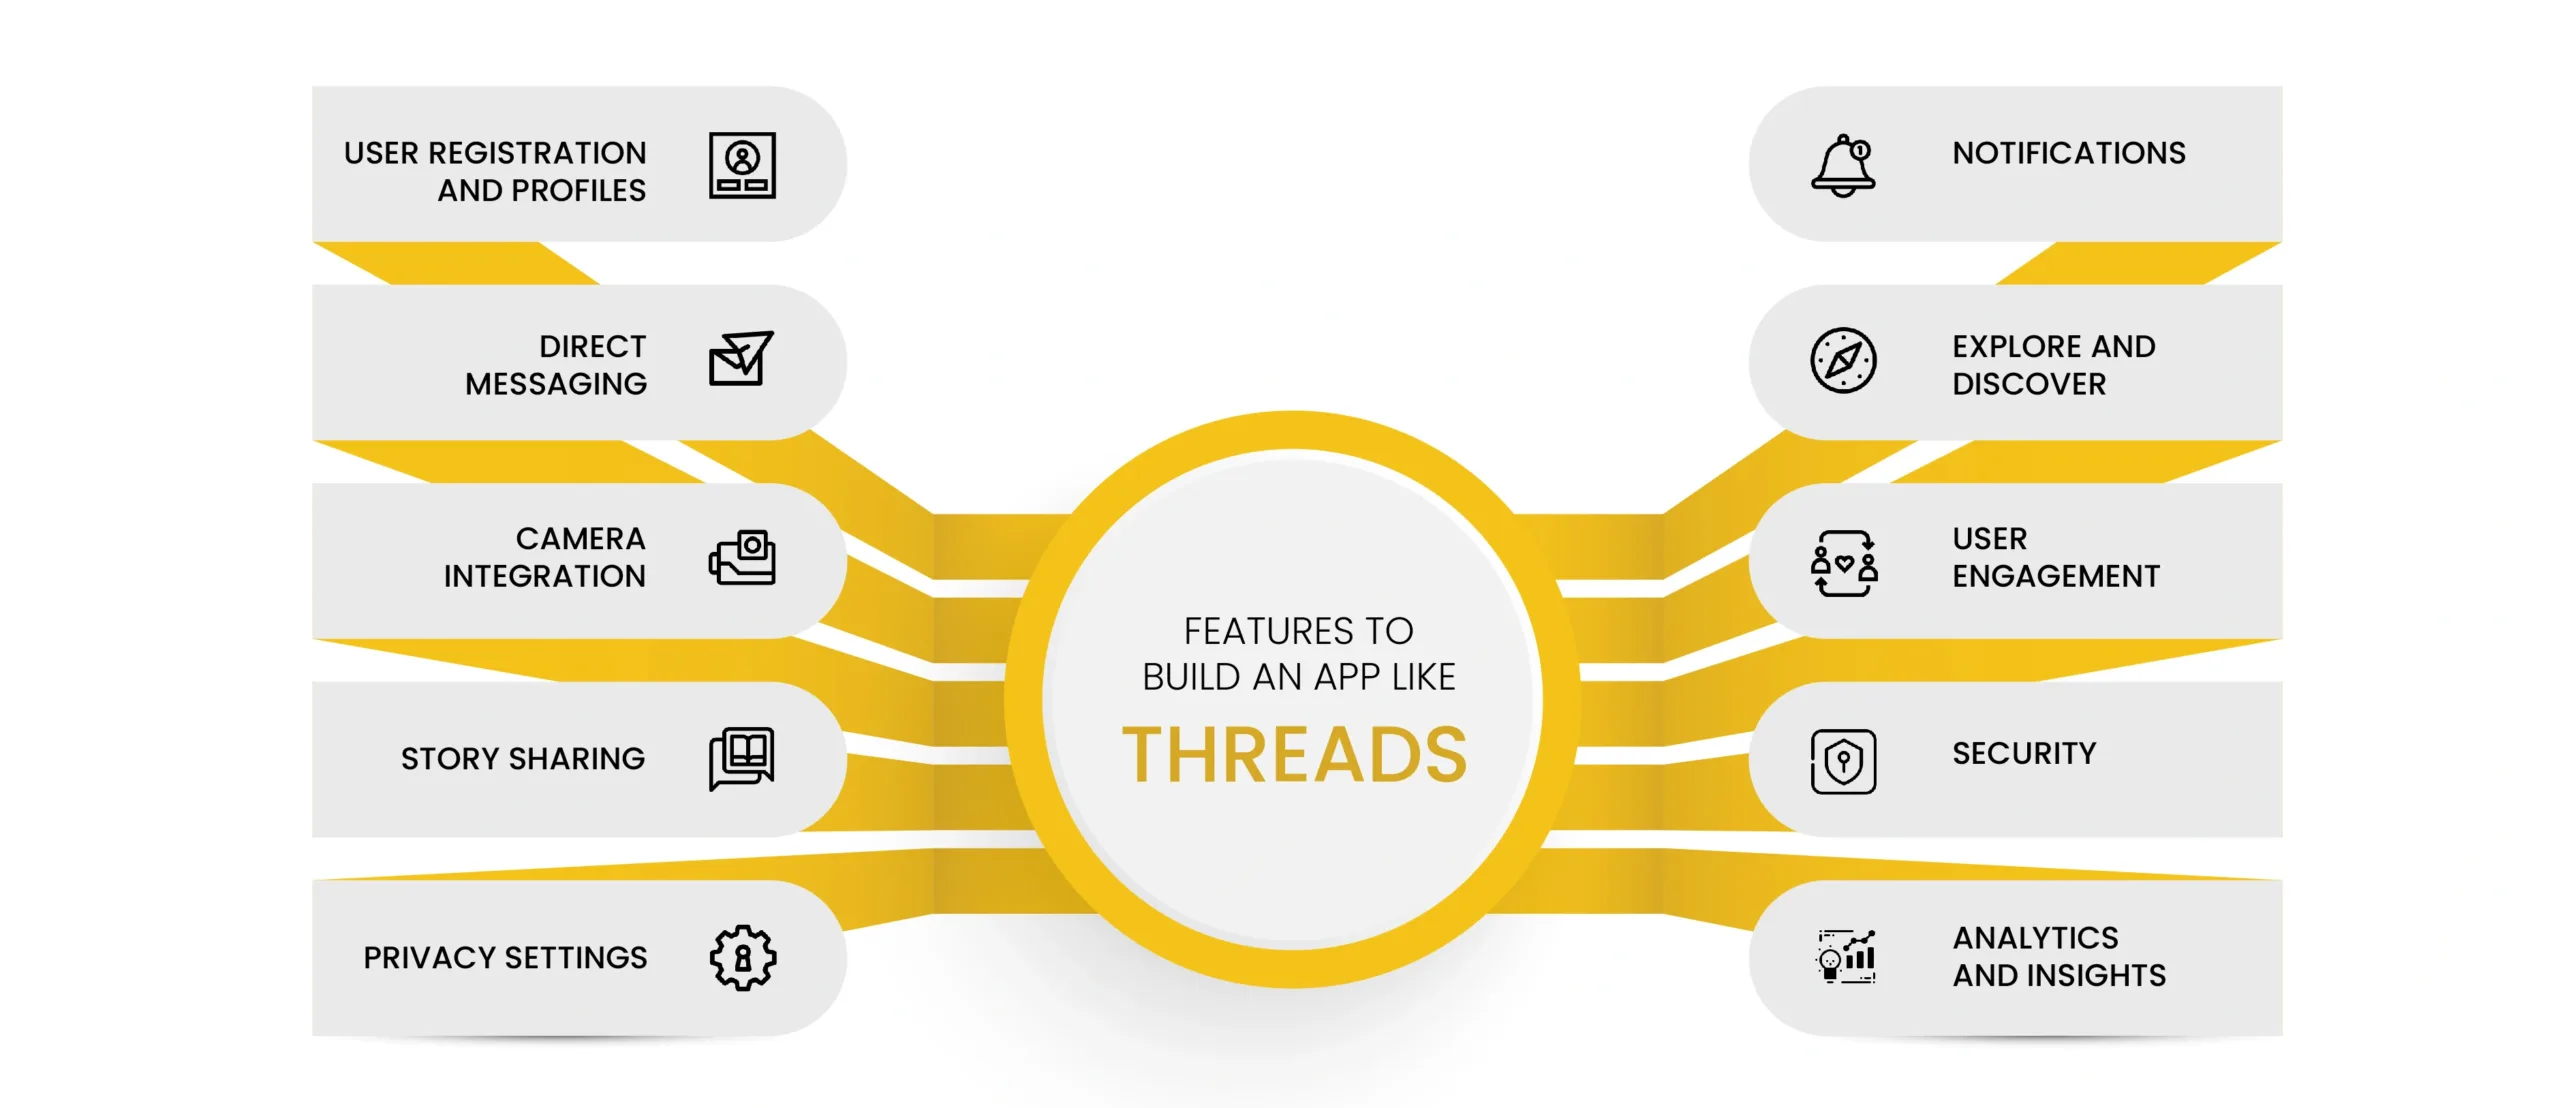 Features to Build an App Like Threads